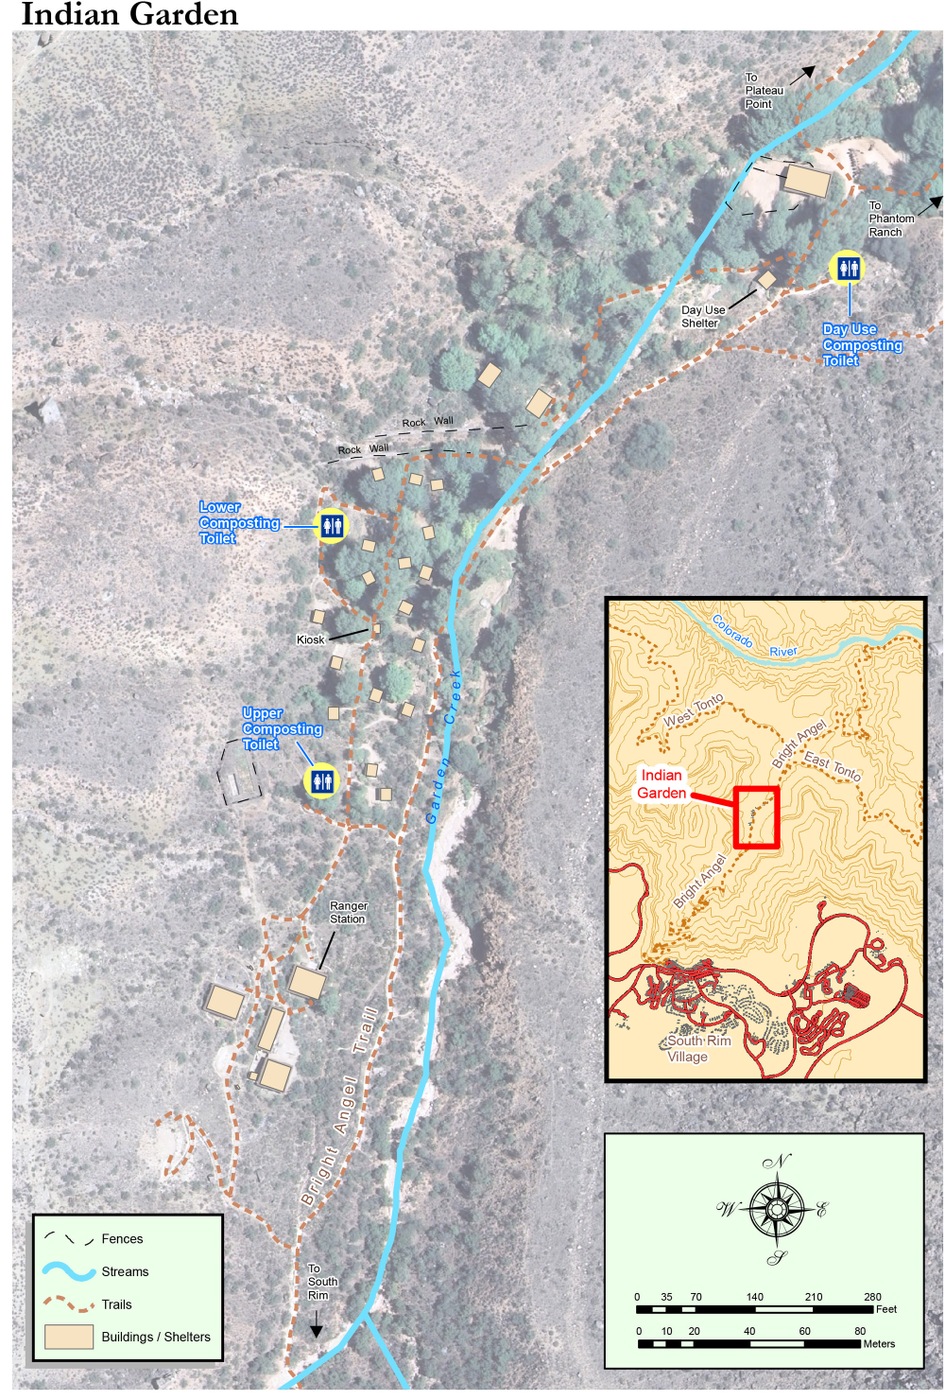 Map of Indian Garden area in the Grand Canyon showing locations of upper campground, lower campground, and day use composting toilets. National Park Service photo